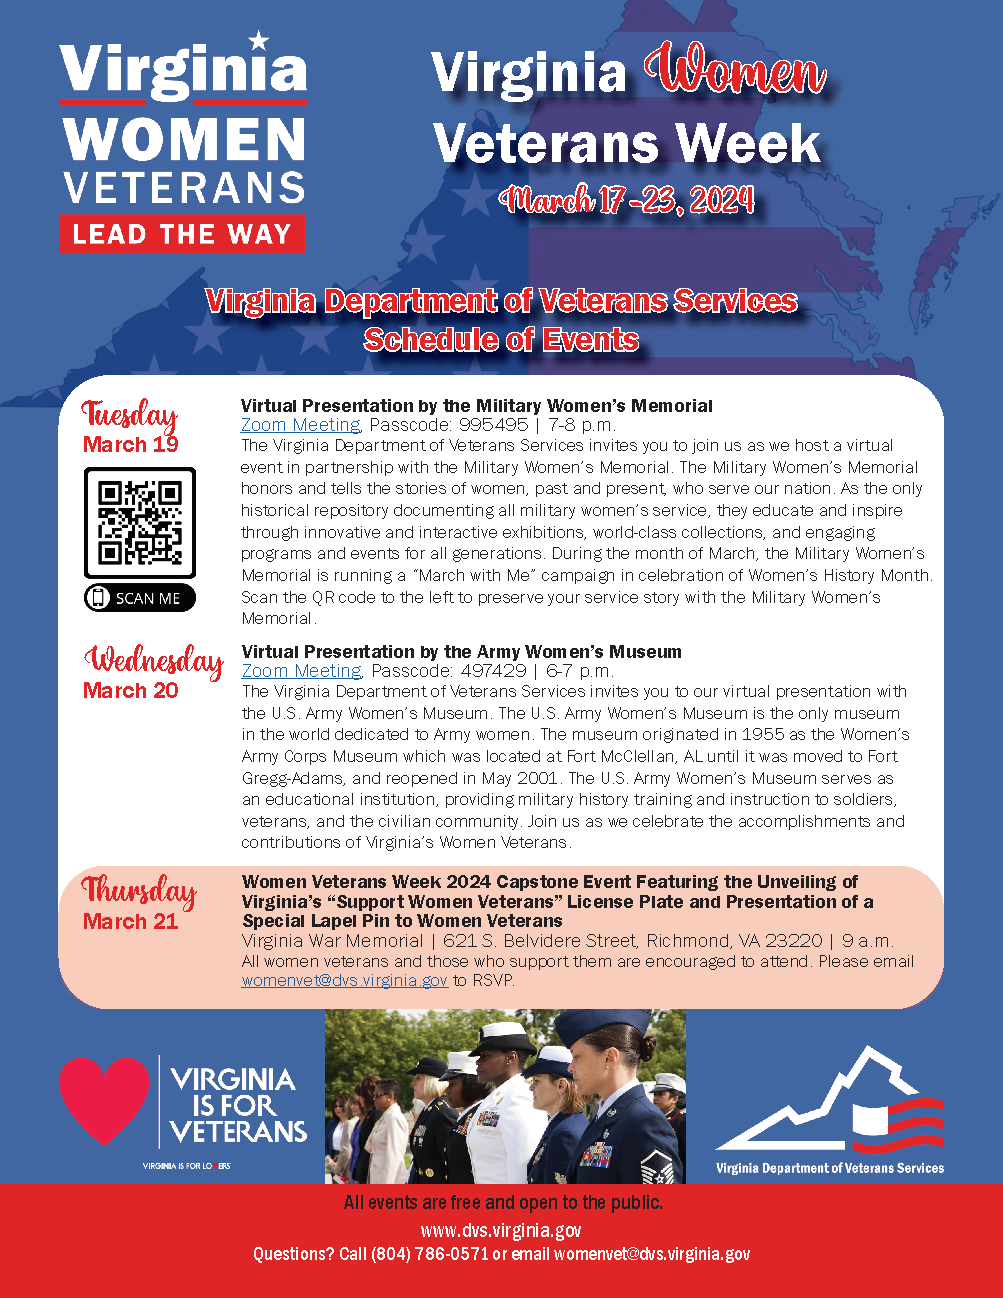 Virginia Department of Veterans Services - Virginia Women Veterans Week, March 17 to 23, 2024. Schedule of Events: March 19, 7-8 PM, virtual presentation by the Military Women's Memorial